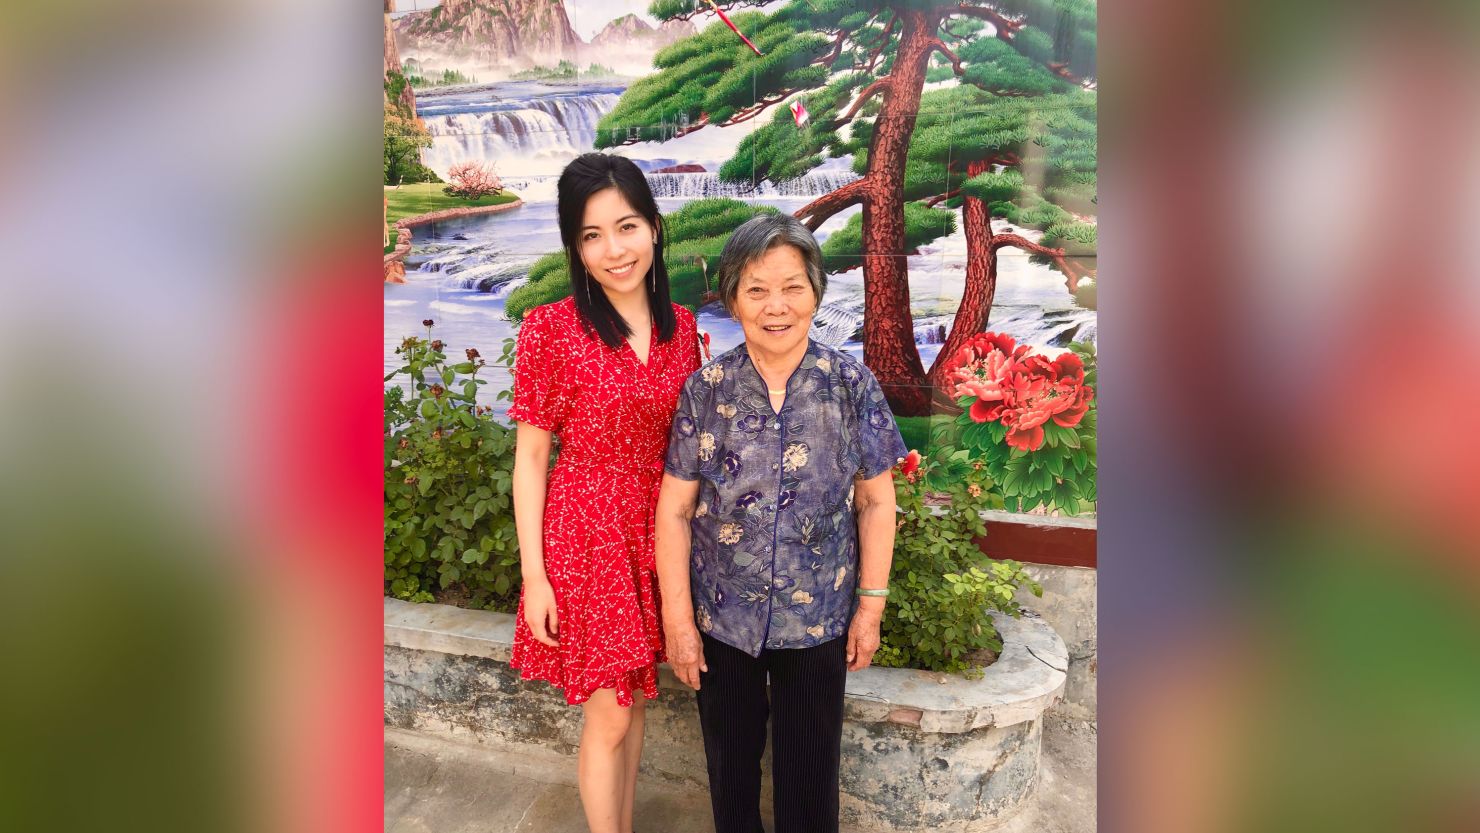 Selina Wang pictured with her grandmother.